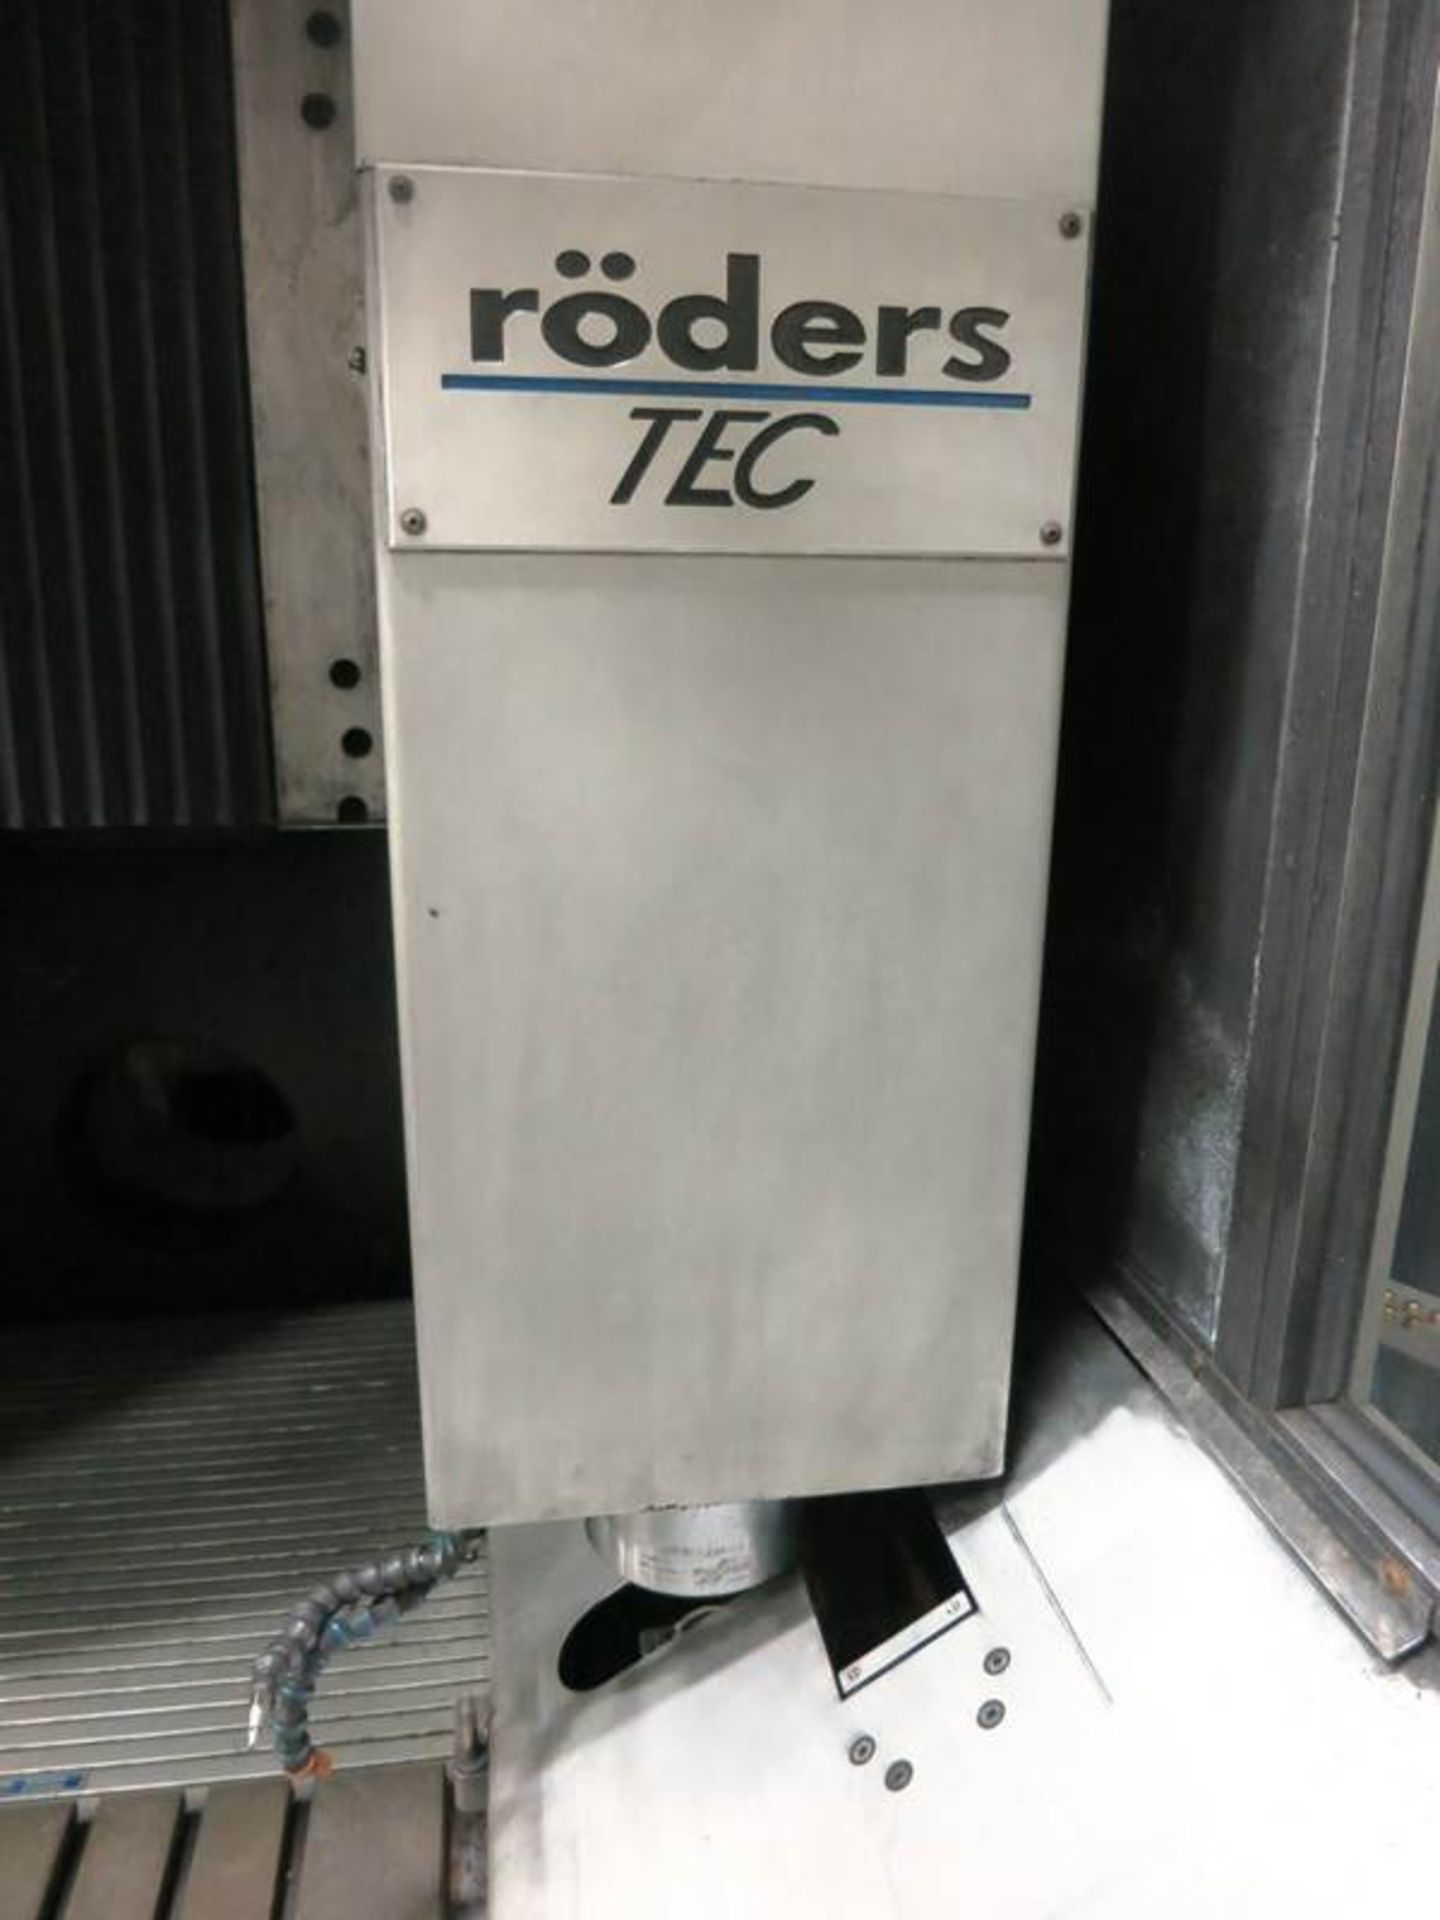 Roders Tec RFM600 CNC 3-Axis High Speed Vertical Machining Center, S/N 87995-43 - Image 5 of 9